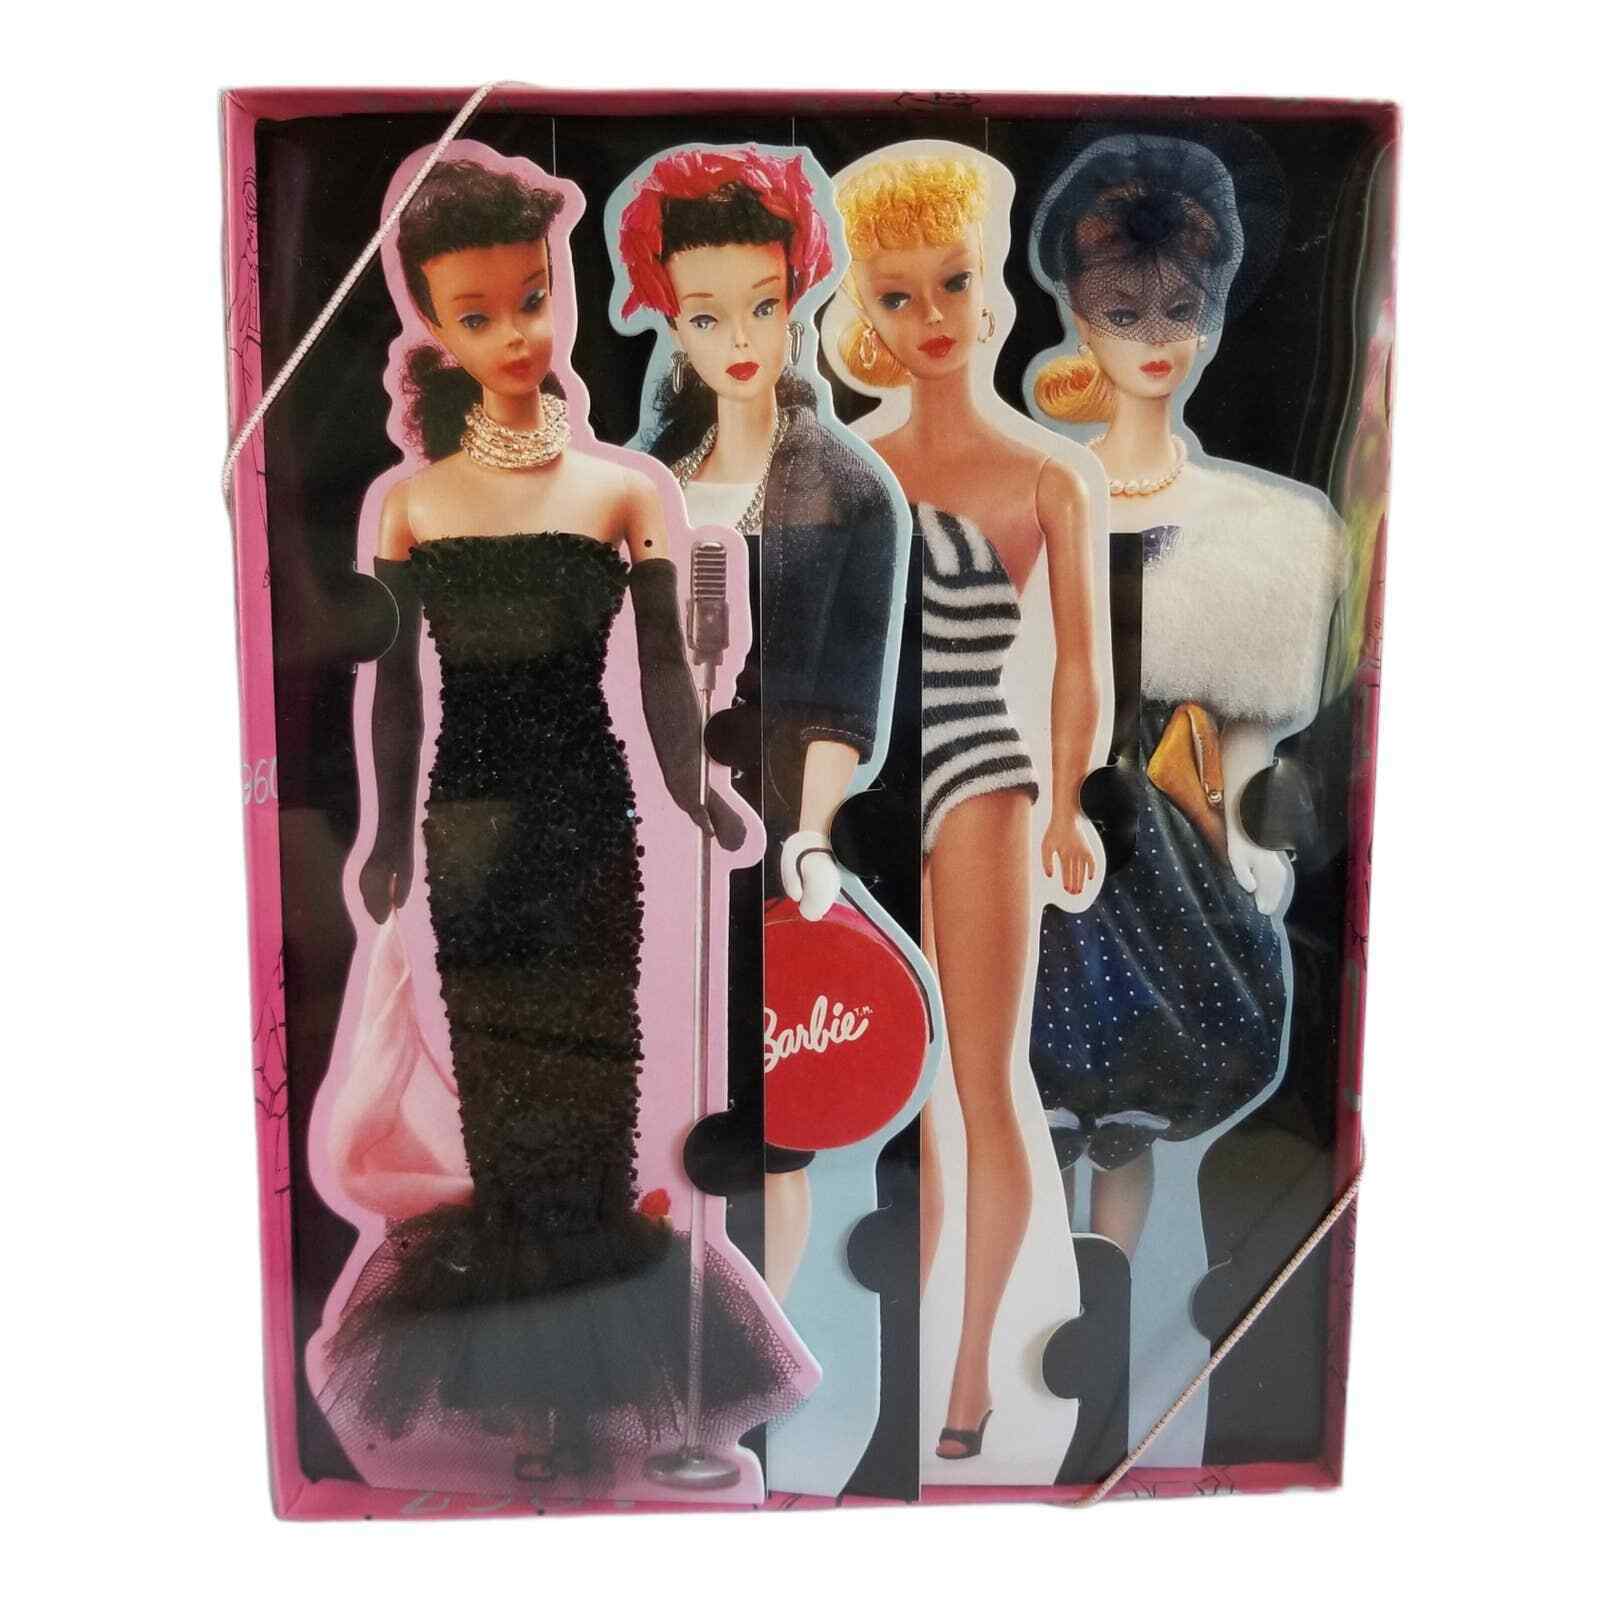 Glamour Dream Collection Barbie Greeting Cards 1994 Mattel 4 Blank Cards W/envel